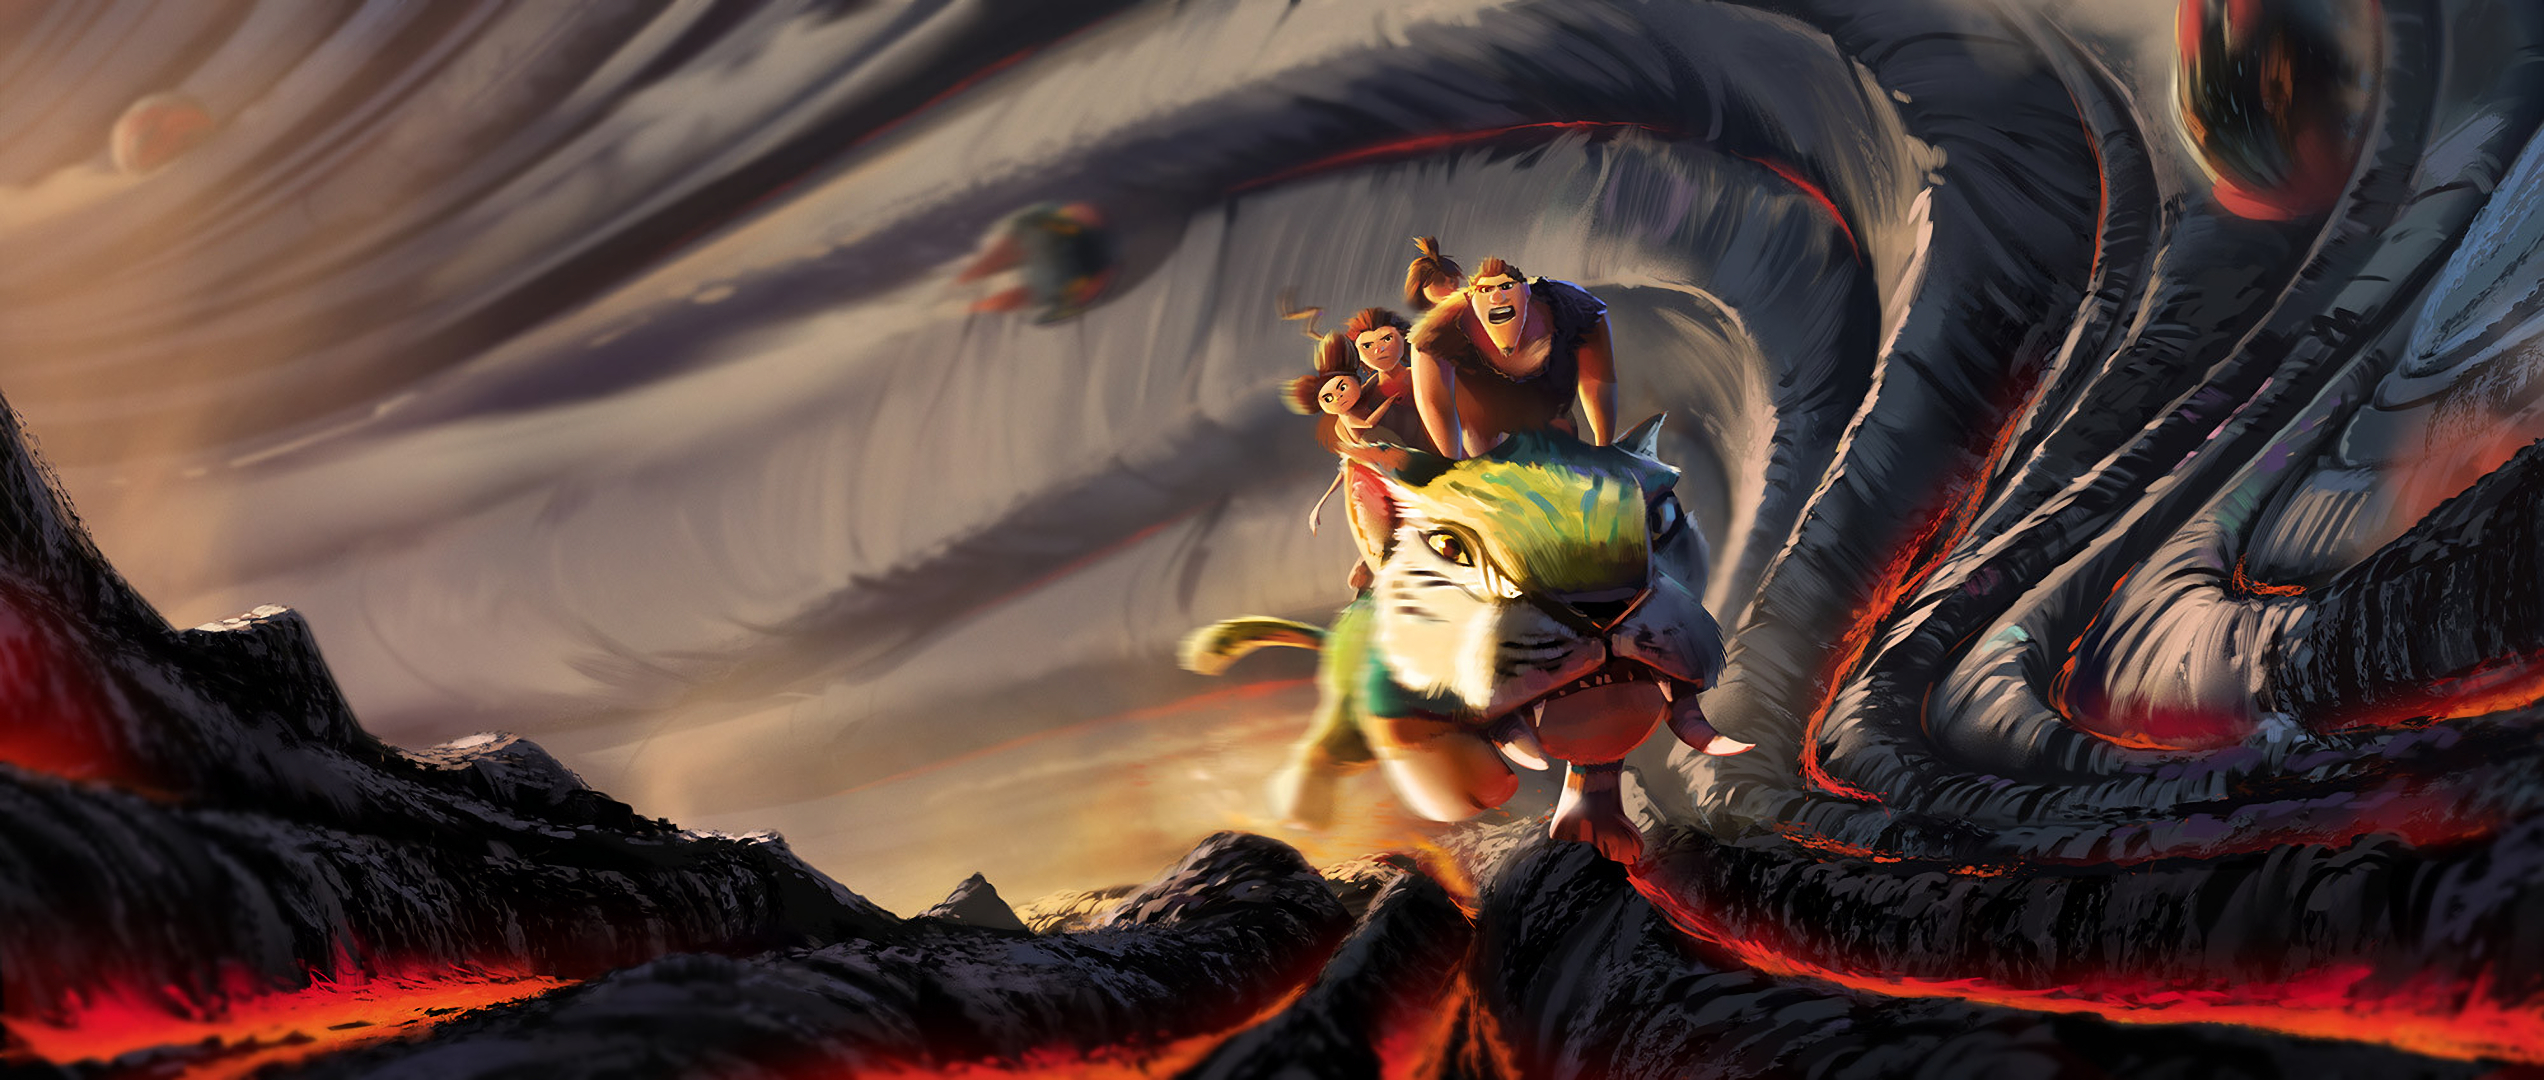 2544x1080 20+ Ugga (The Croods) HD Wallpapers and Backgrounds